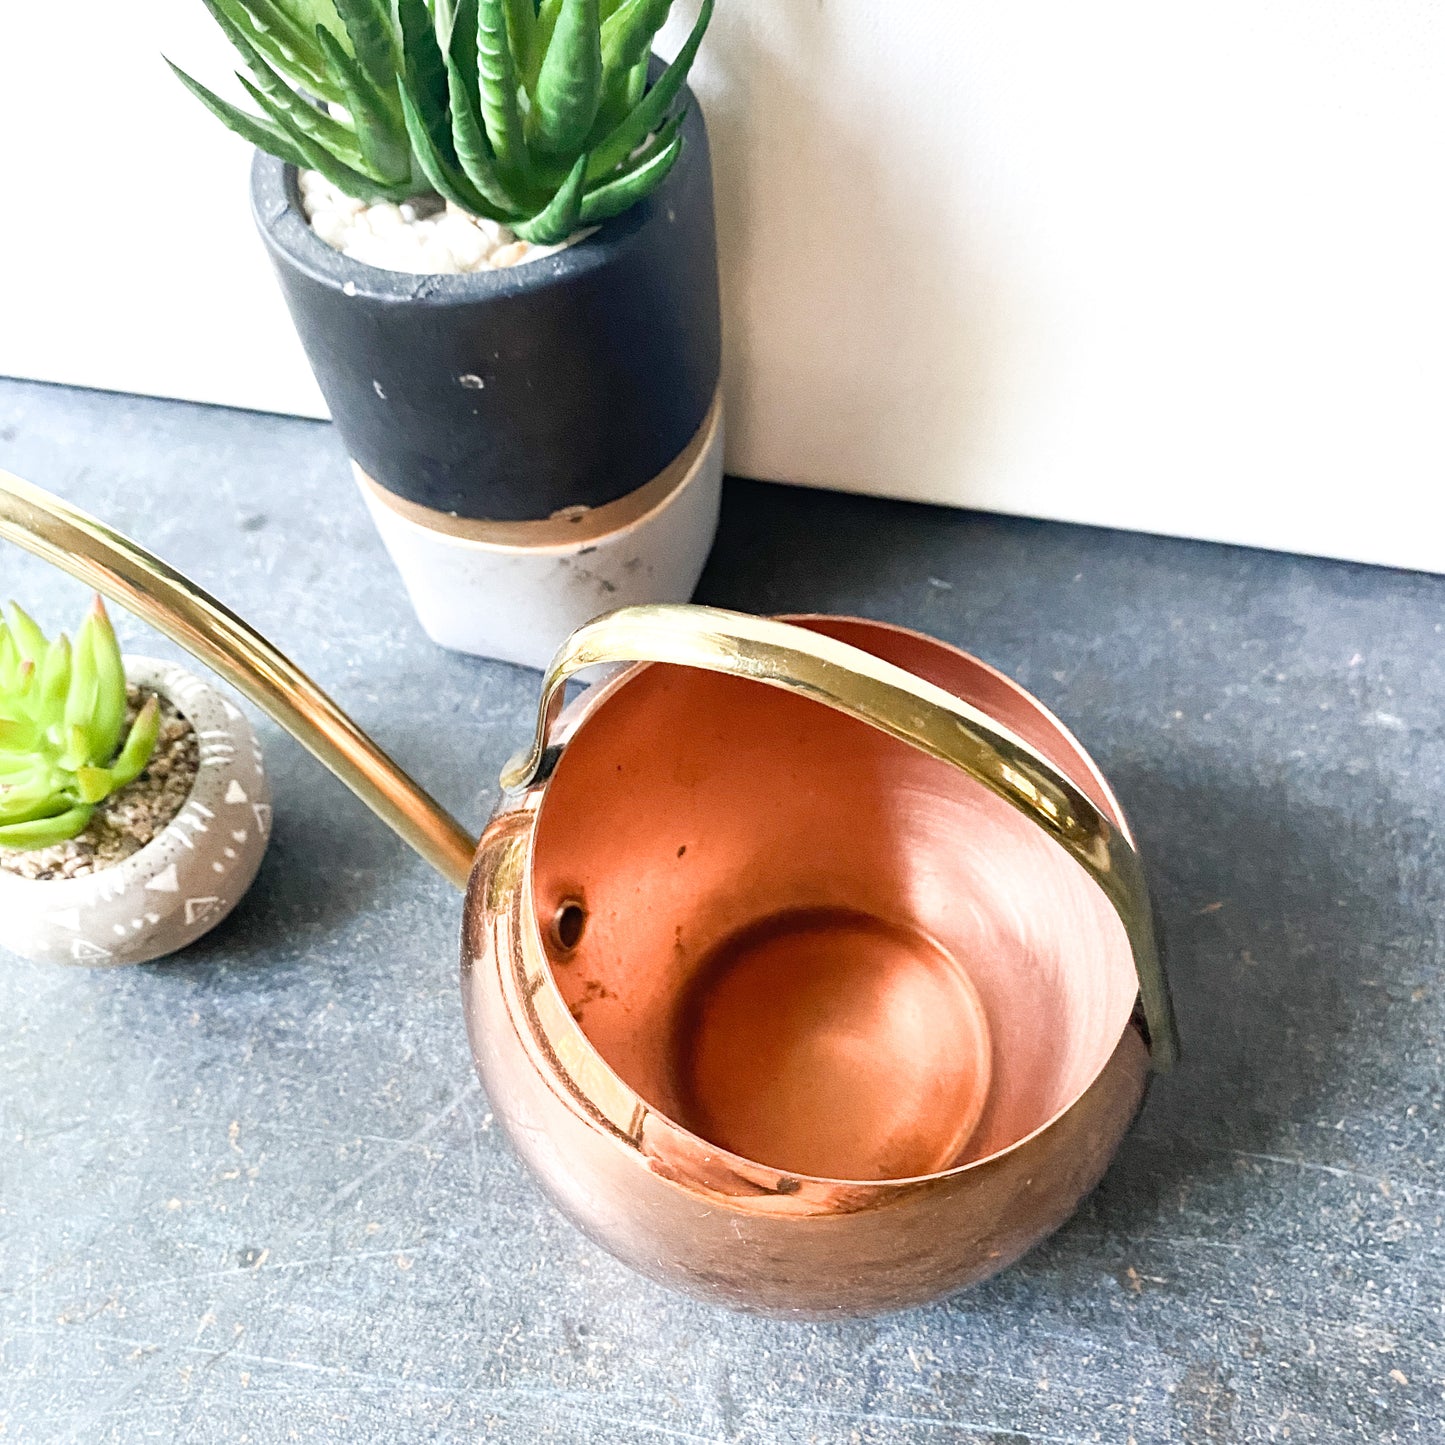 Copper Watering Can, Vintage Gardening